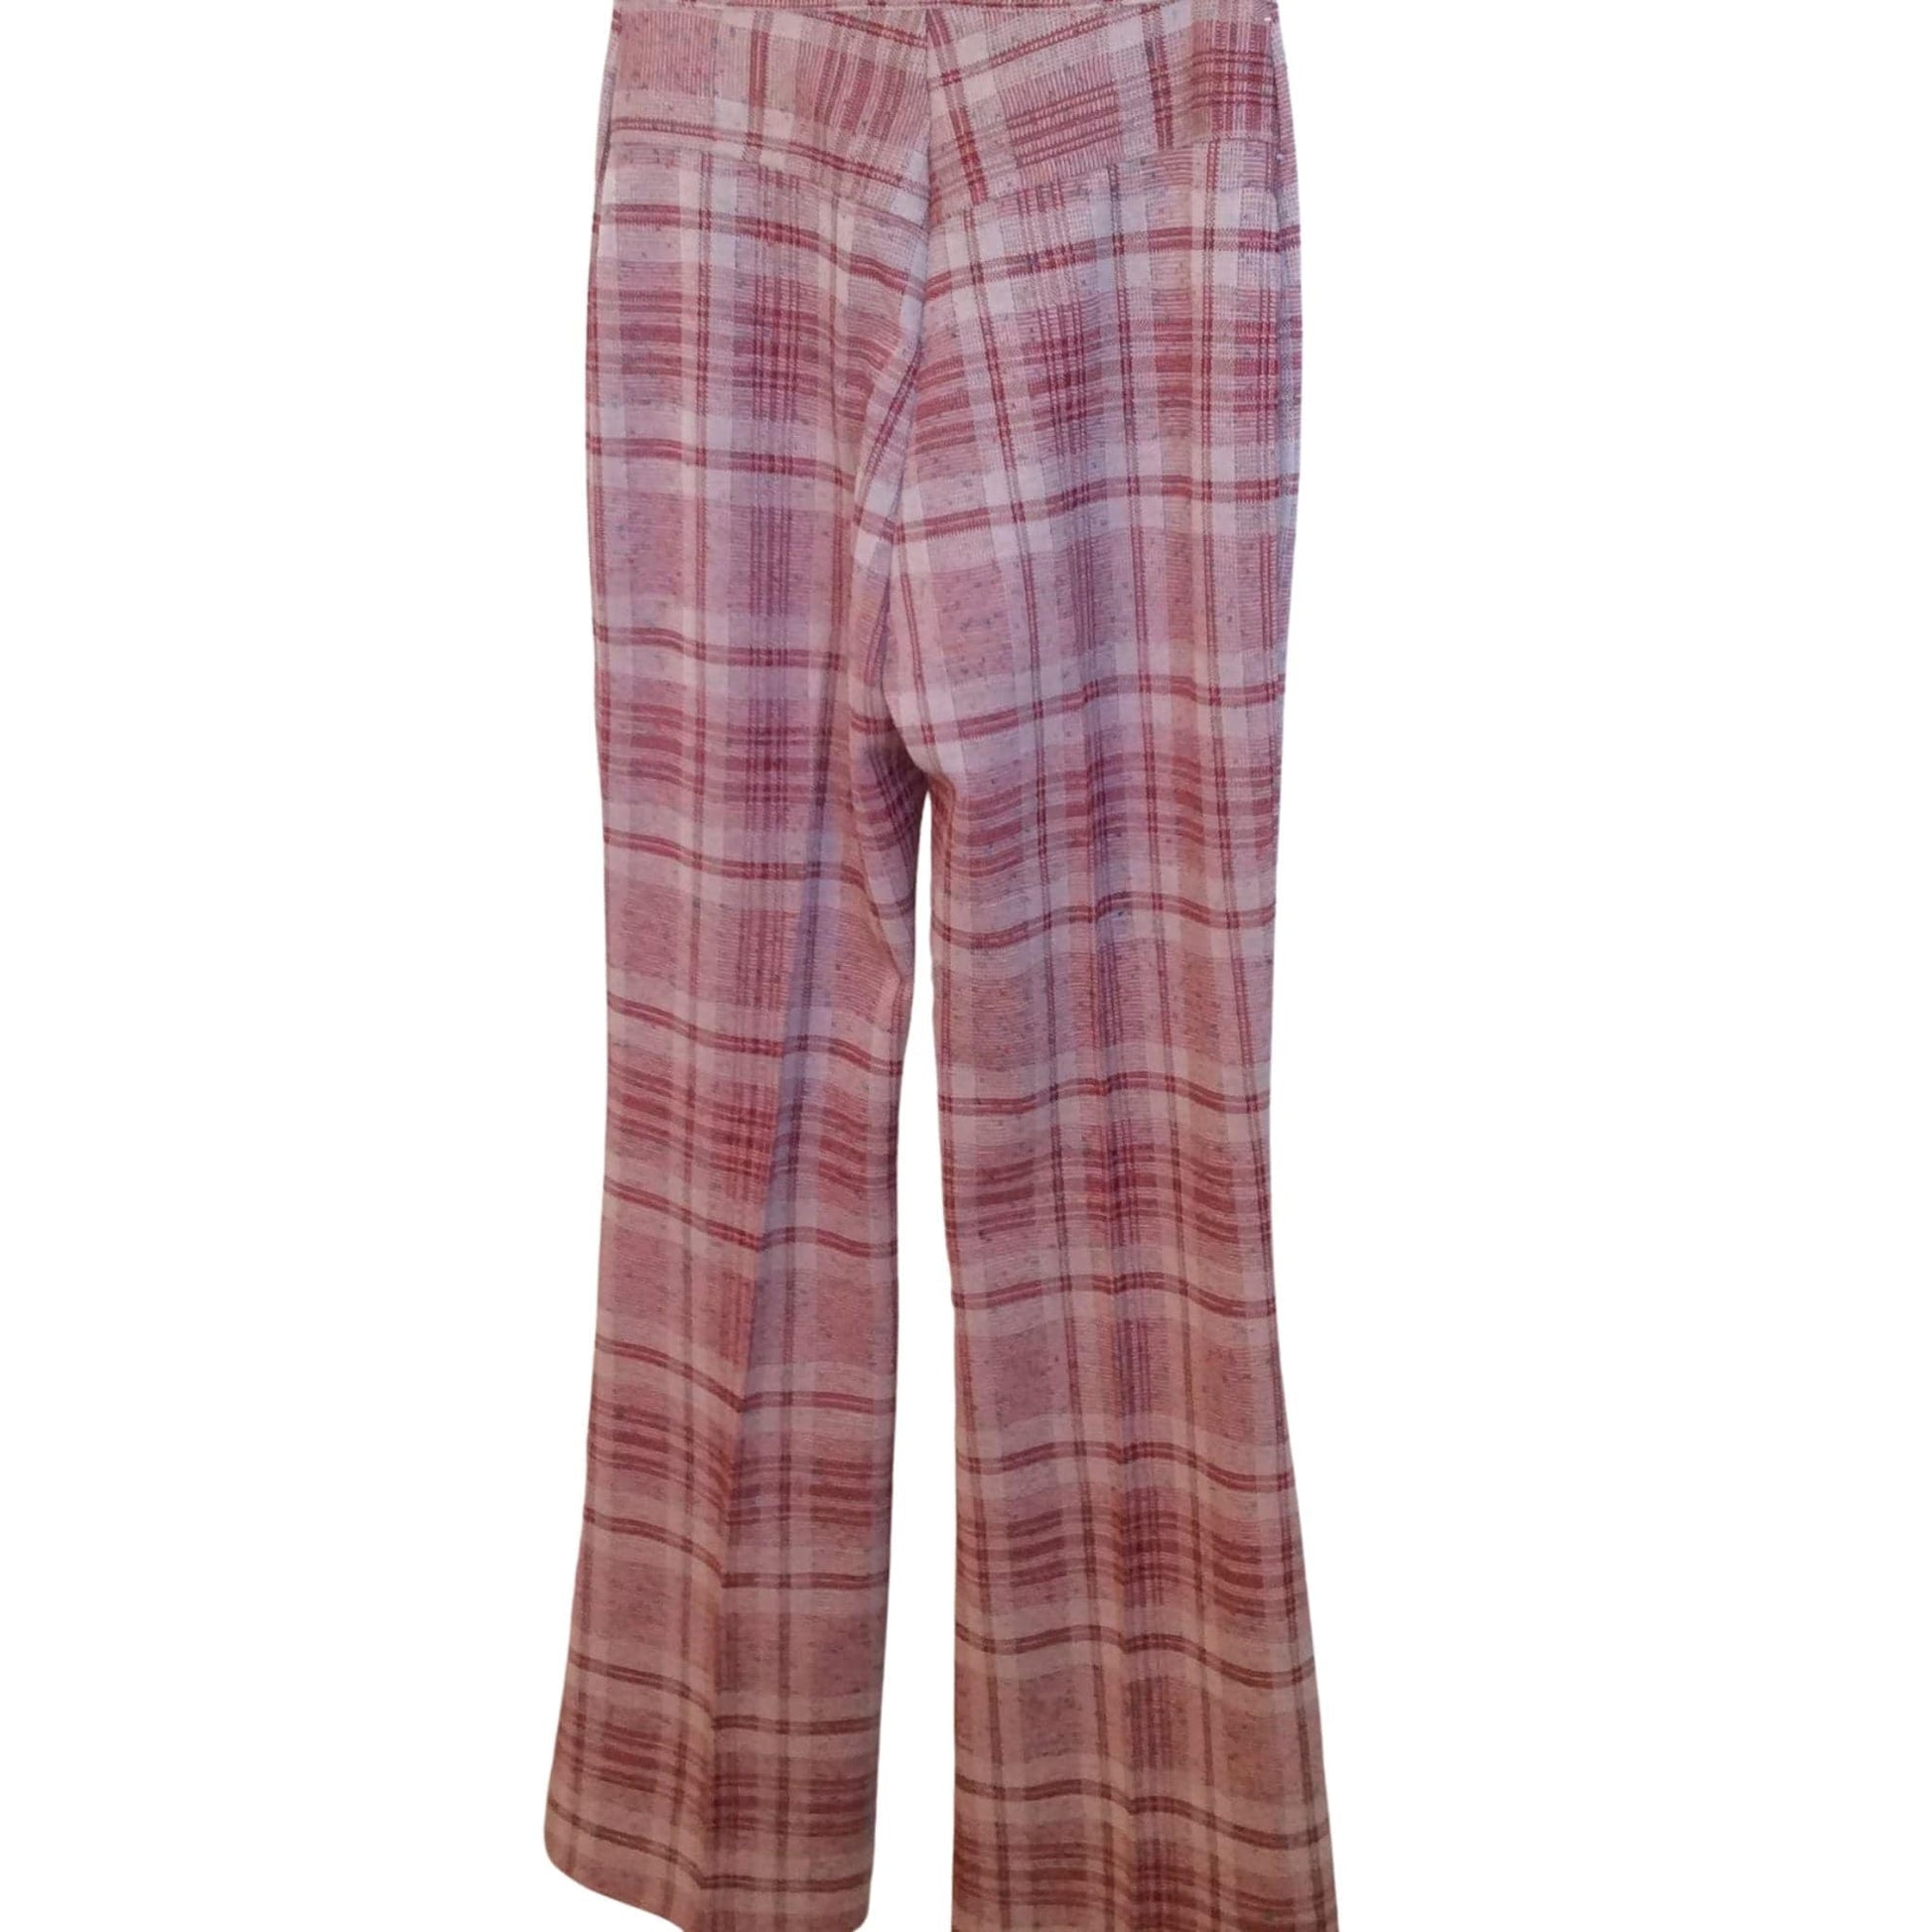 Western Plaid Pants Extra Small / Pink / Vintage 1970s